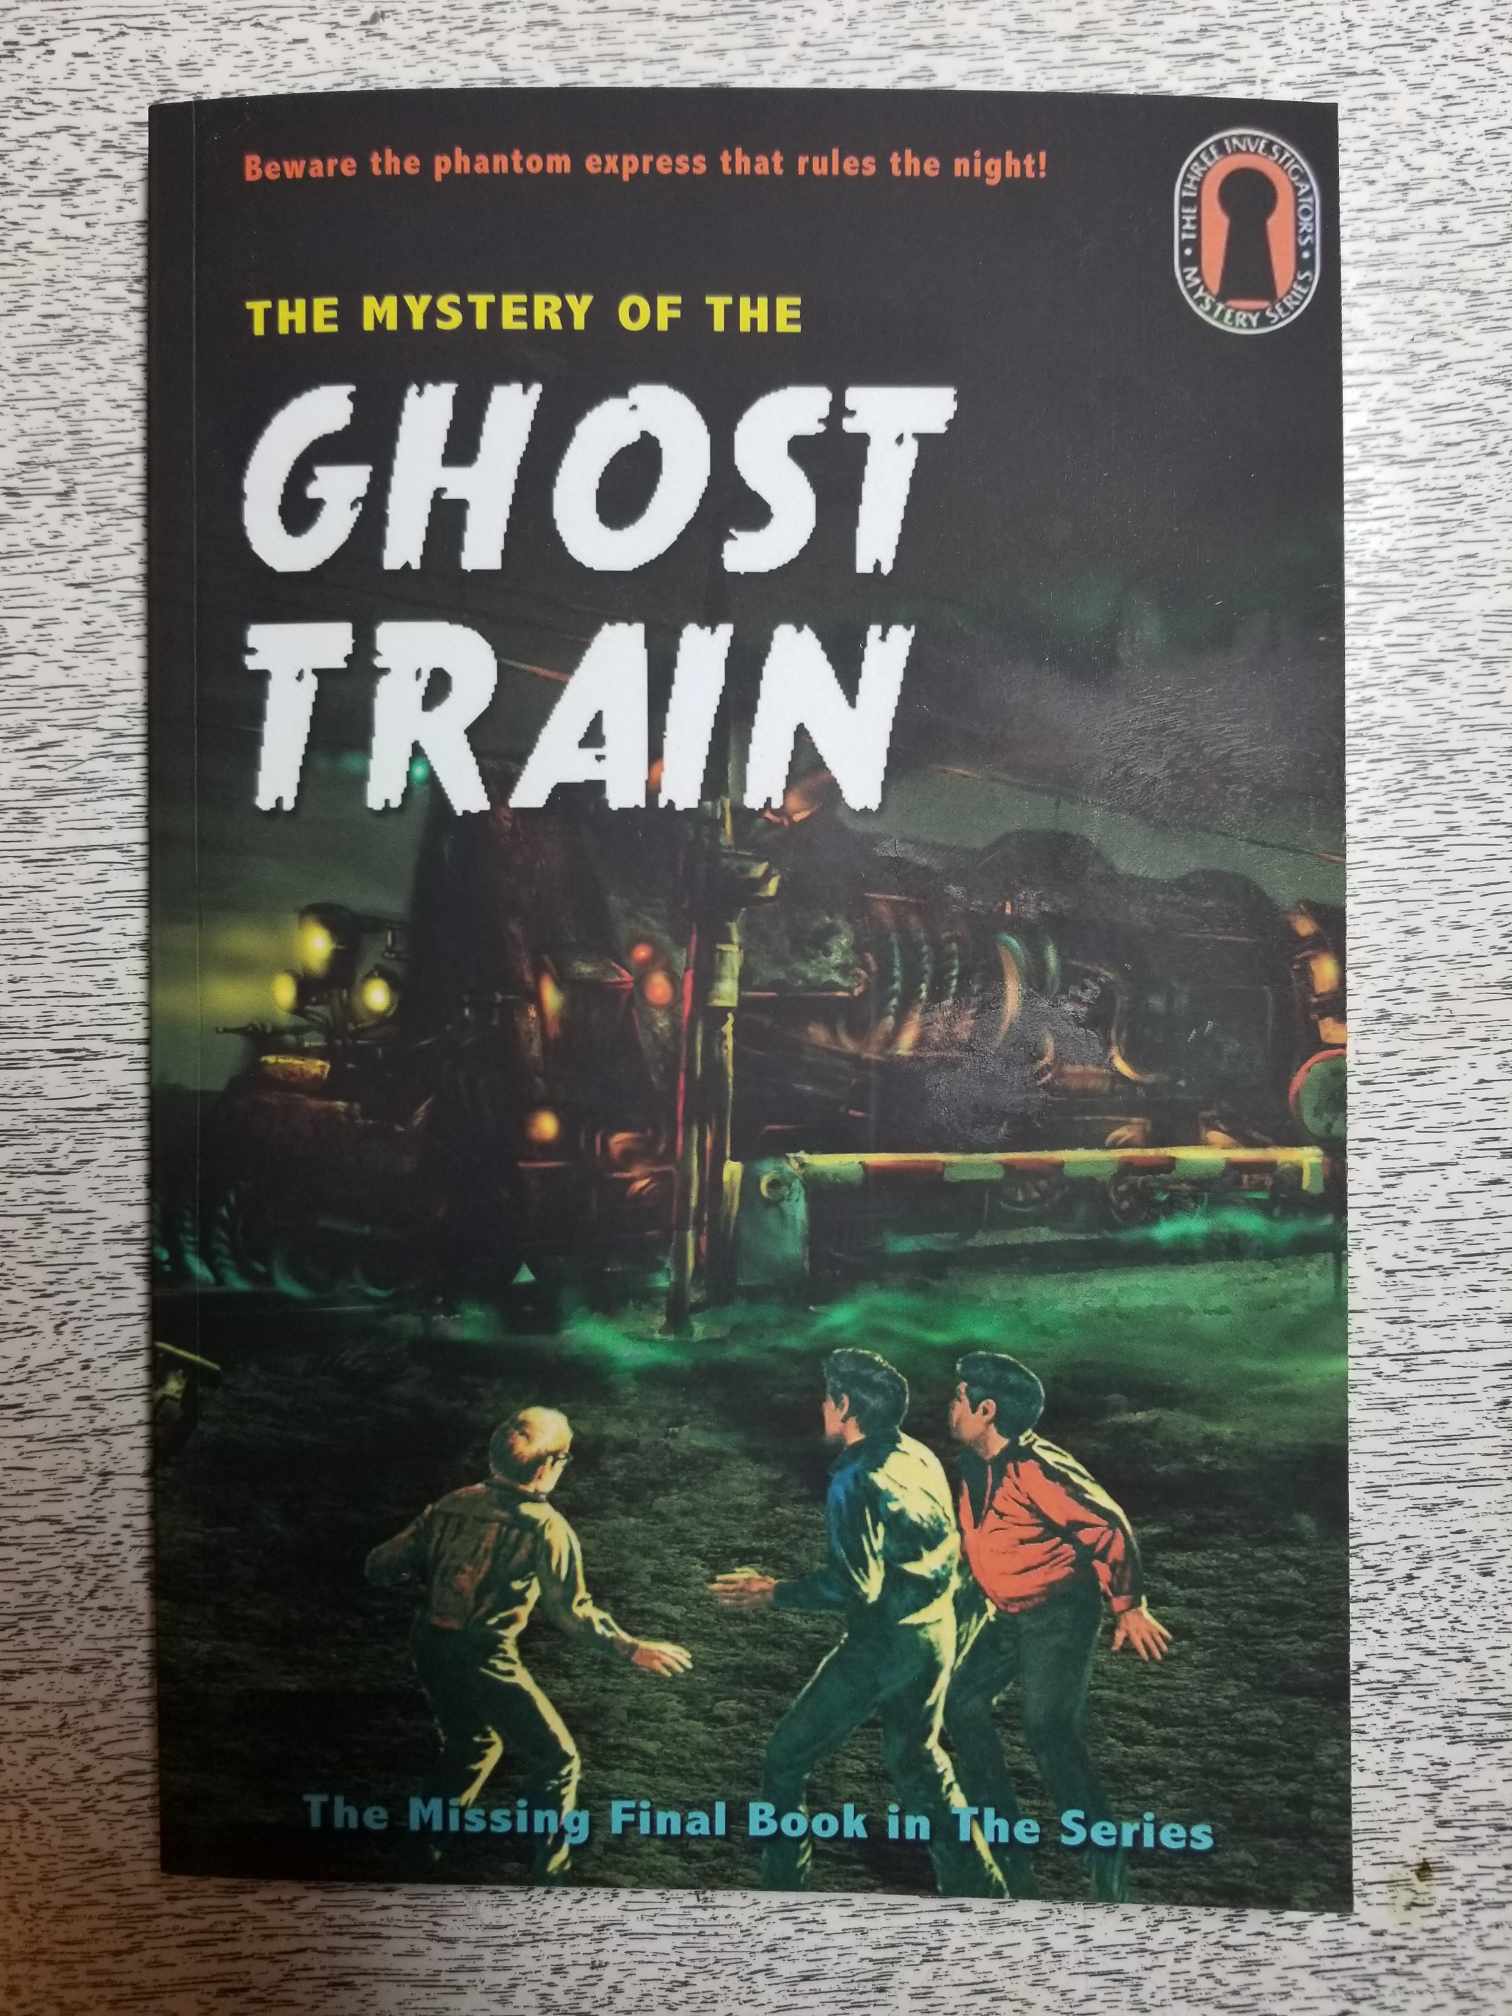 The Mystery of the Ghost Train